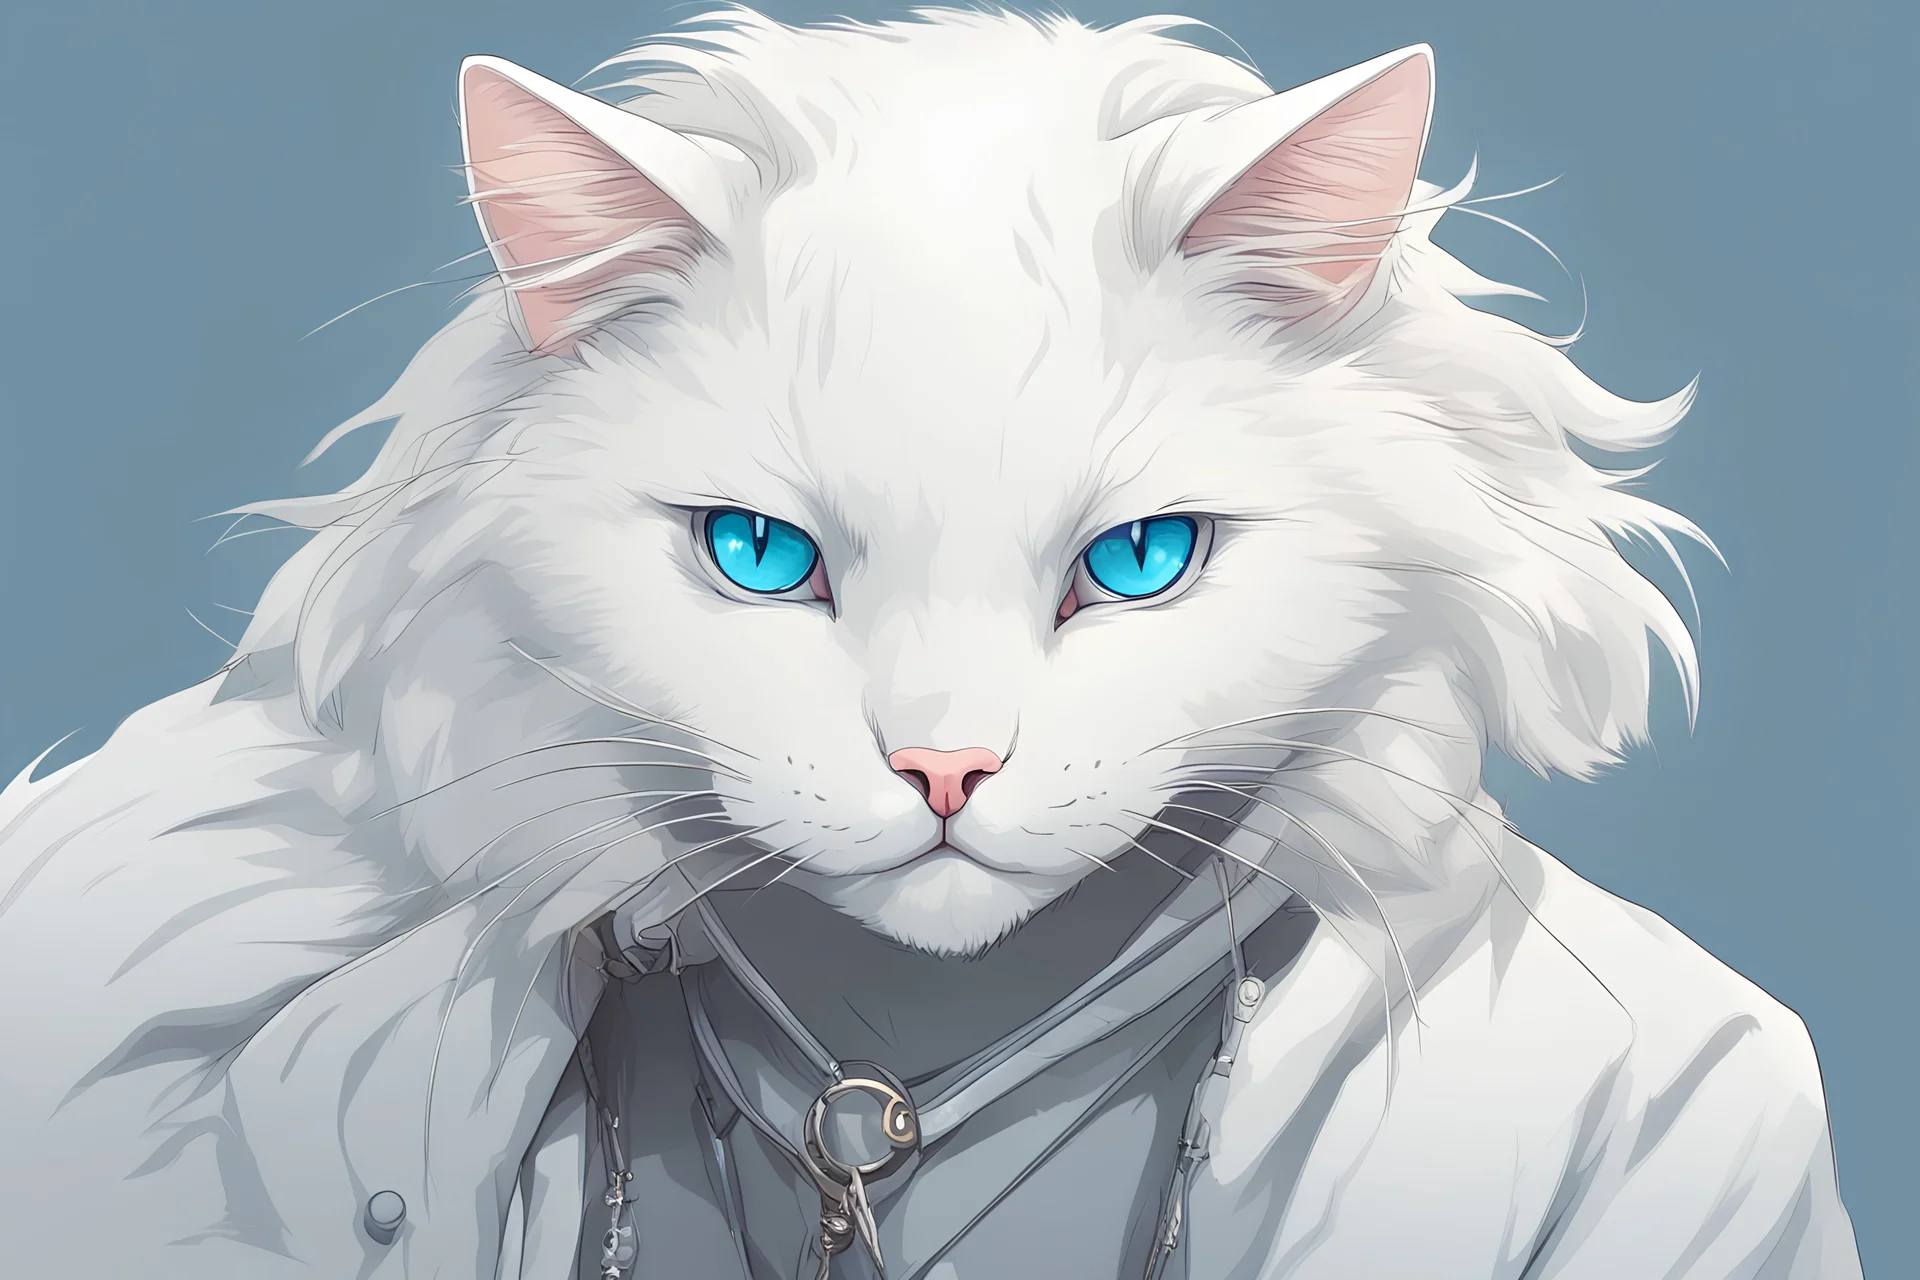 Full illustration of a white cat with blue eyes in anime style